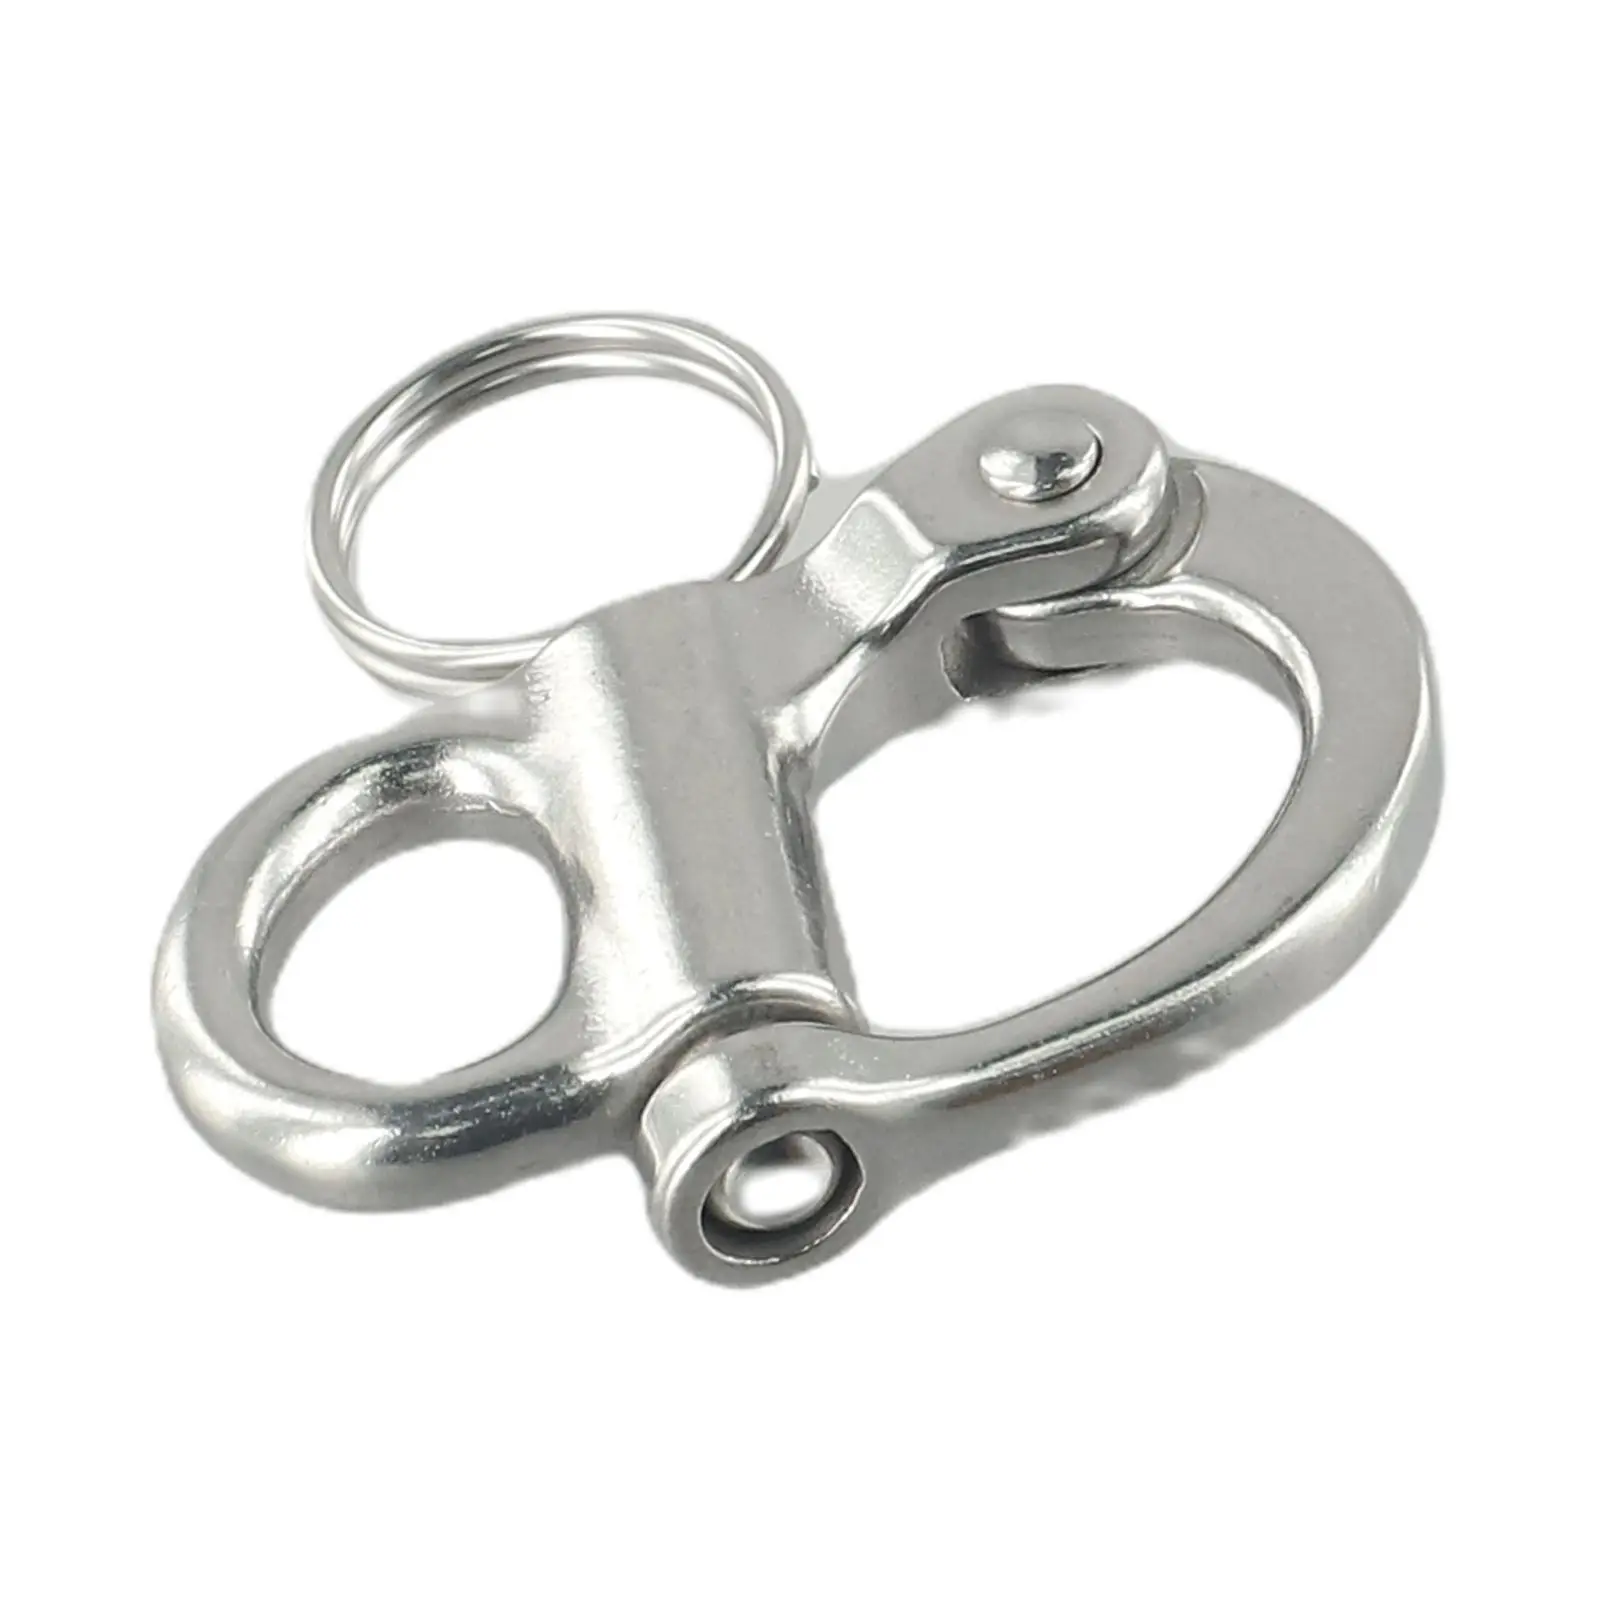 High Quality Practical Brand New Shackle Parts Boat Chain Silver Stainless Steel Anchor Fittings Quick Release